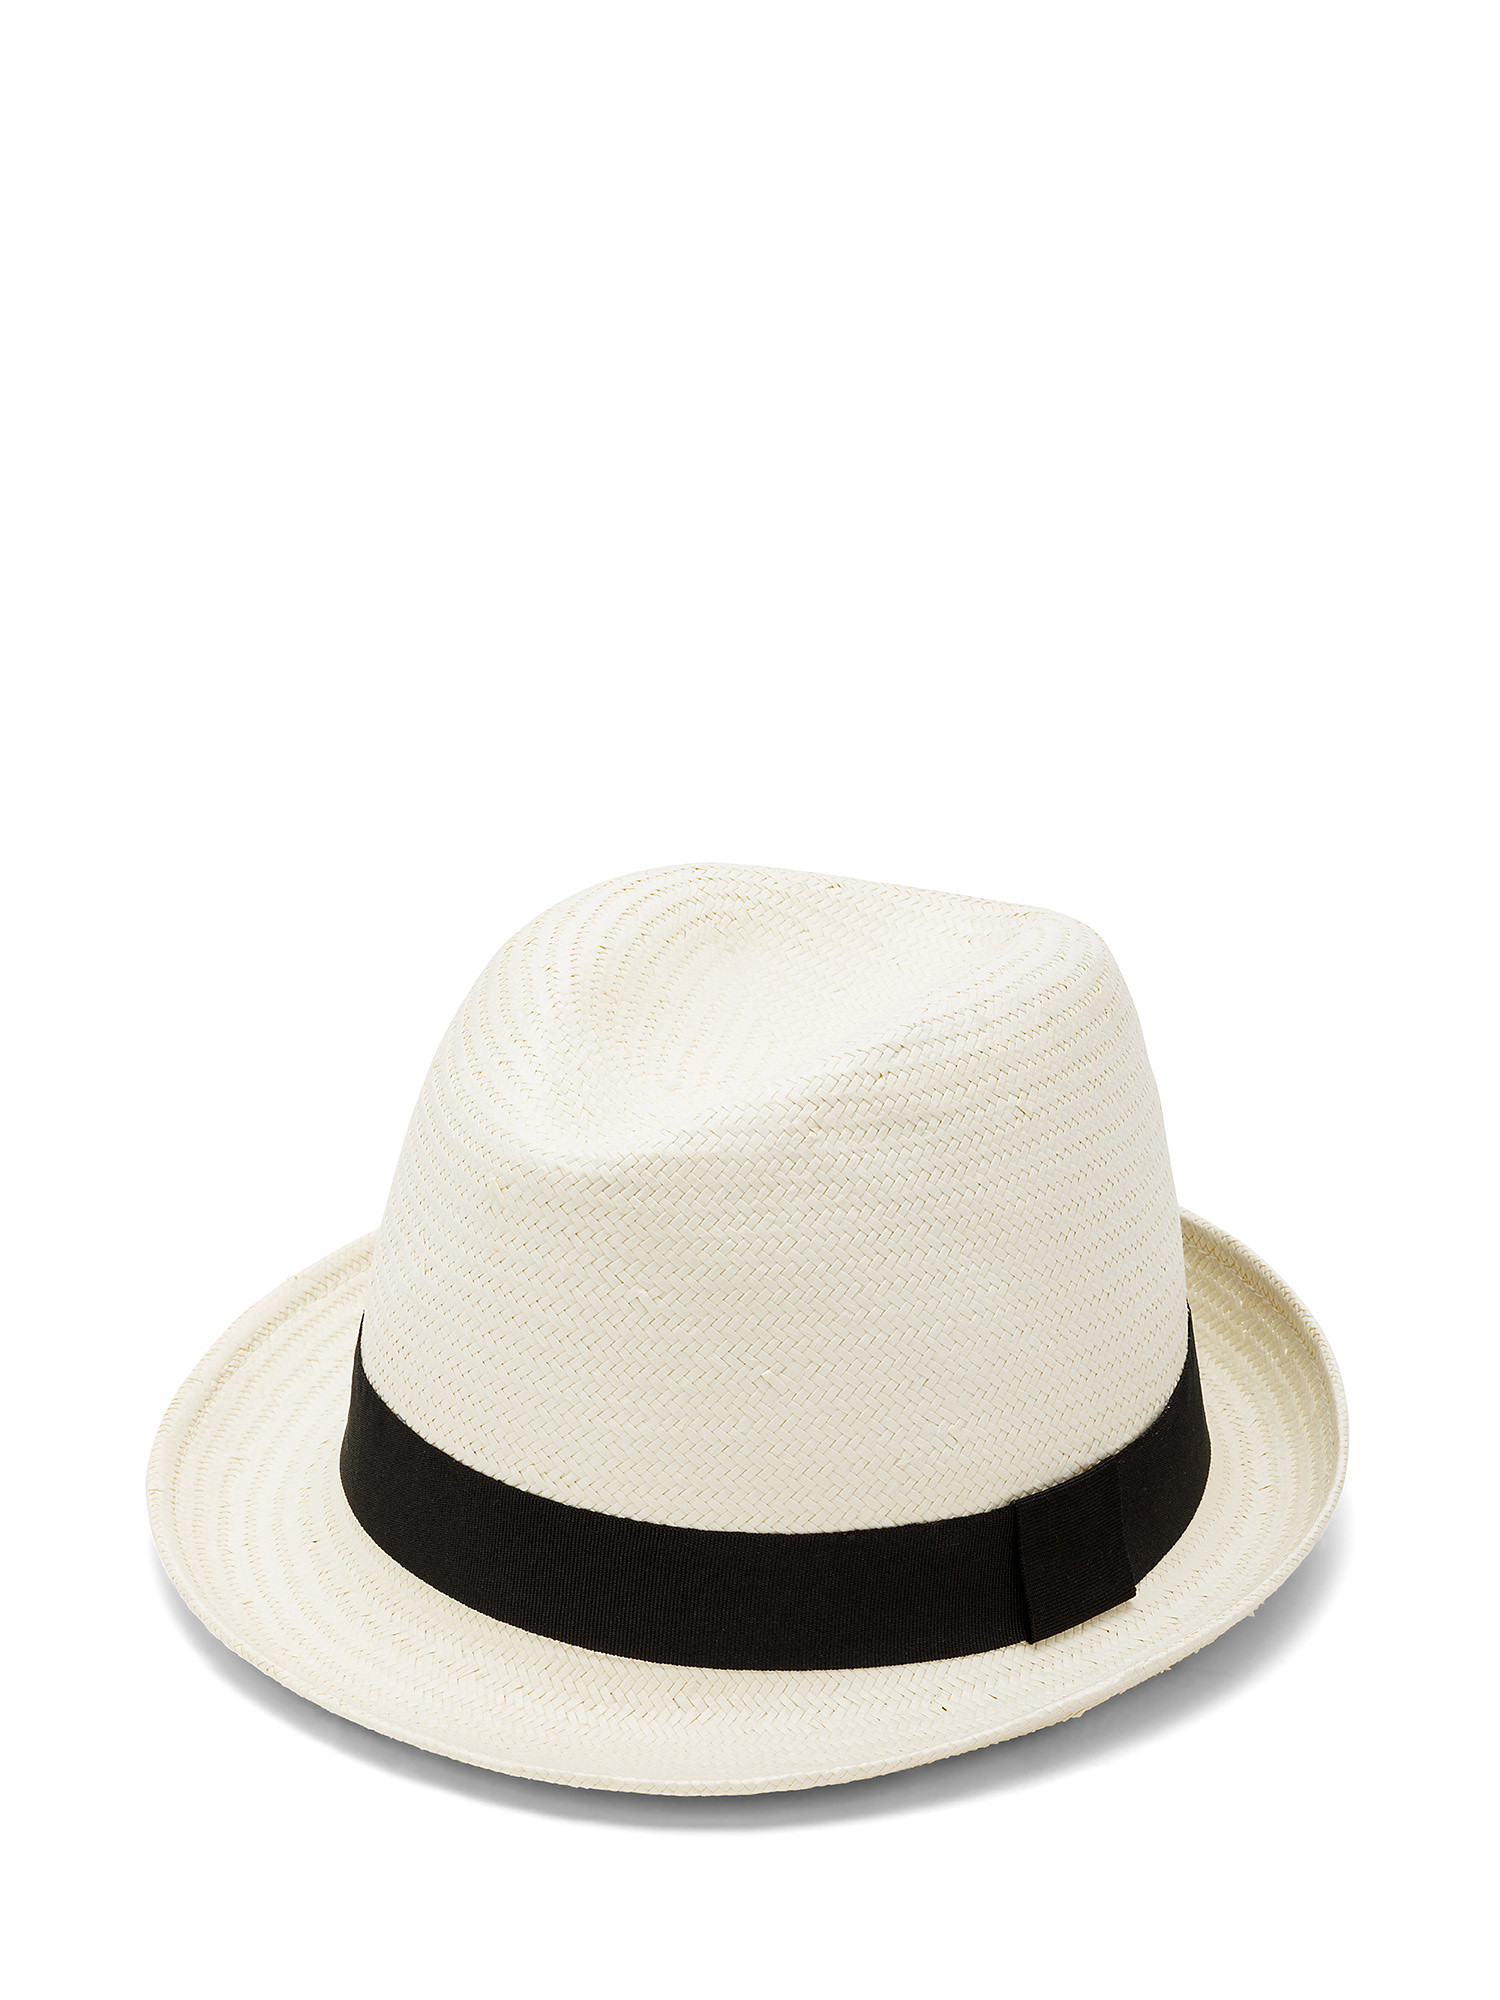 Luca D'Altieri - Alpine hat with band, White, large image number 0